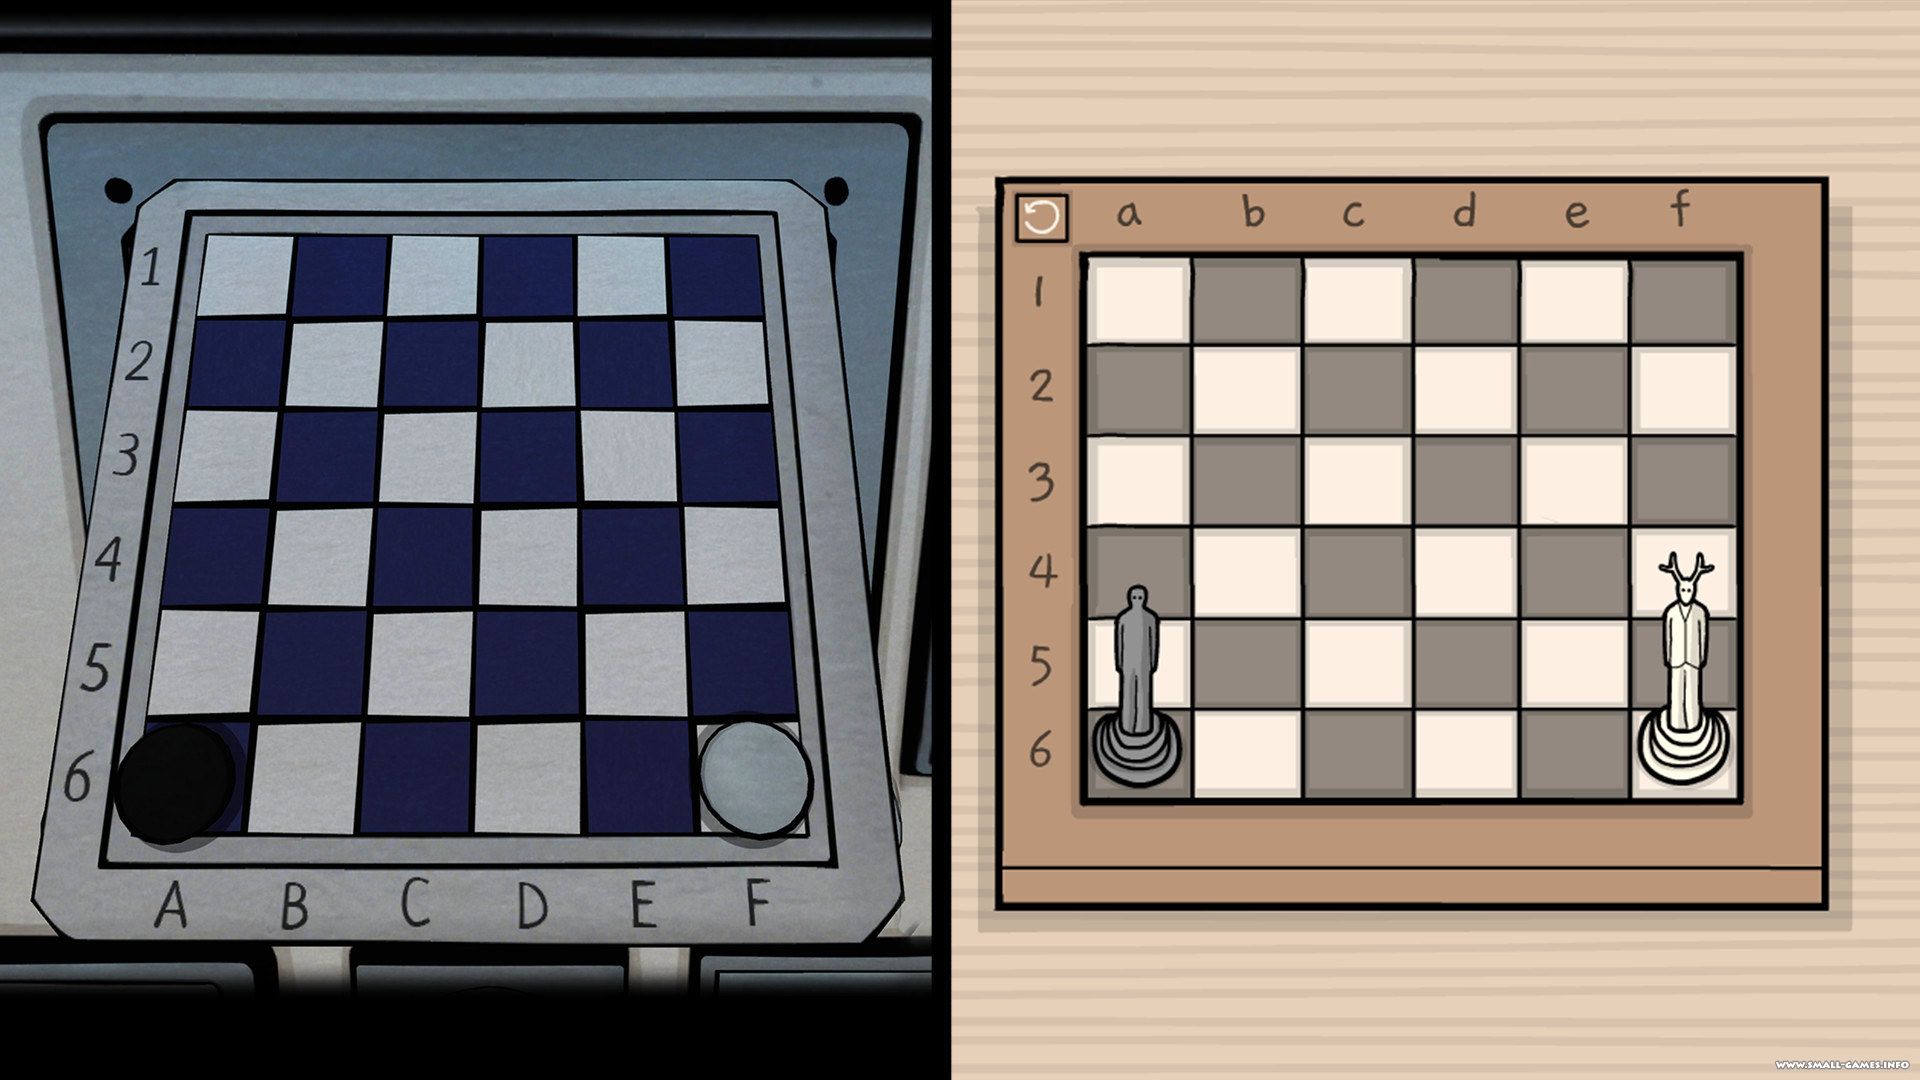 The past. The past within Rusty Lake. The past within Rusty Lake прохождение. Игра "the past within" Постер.